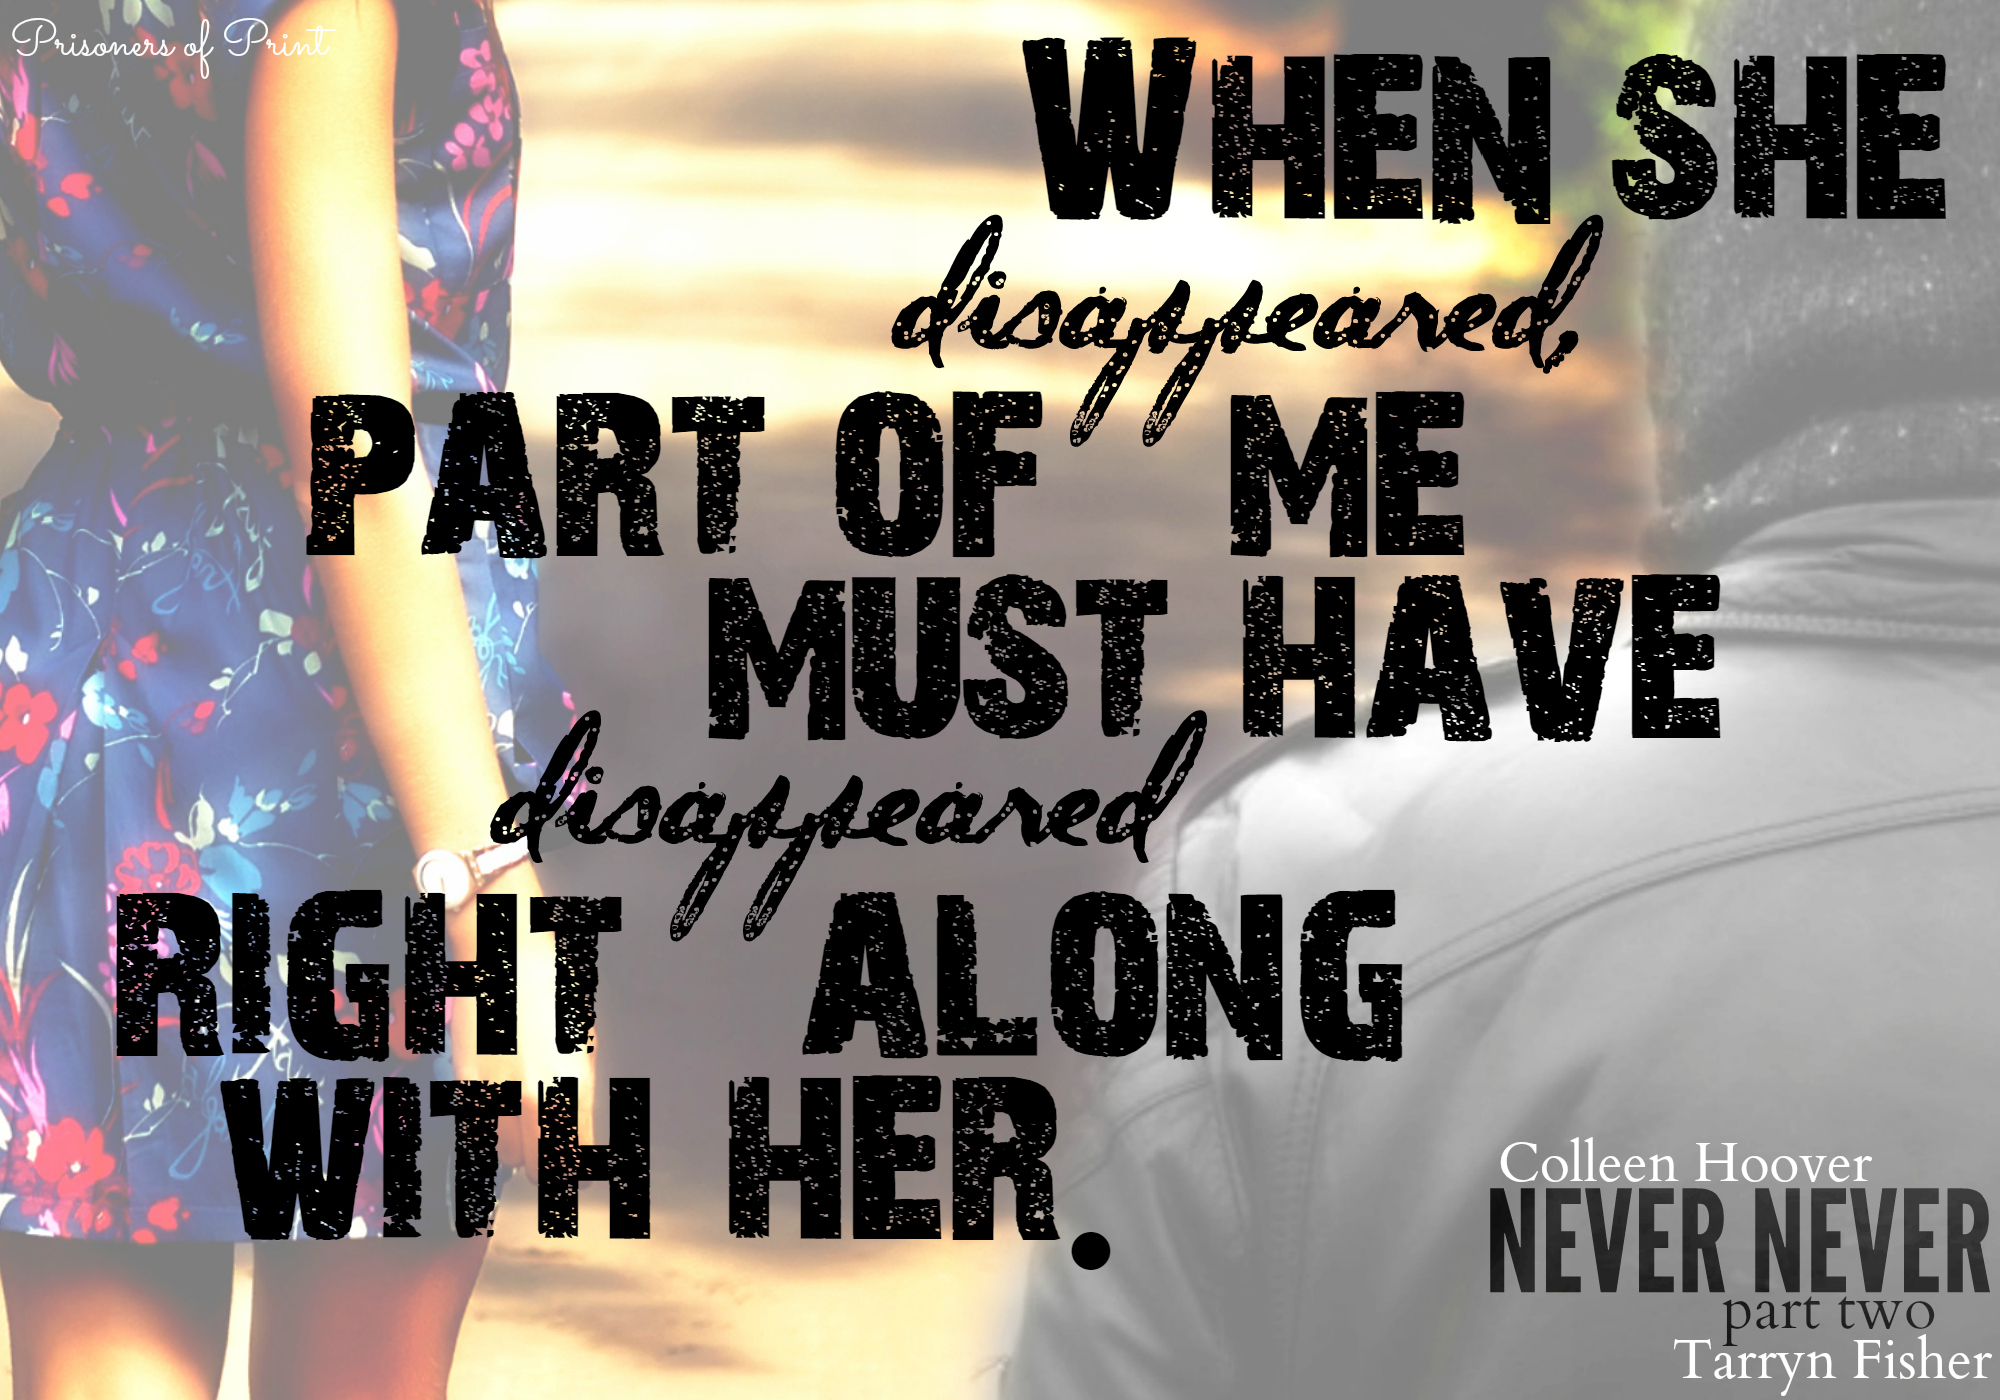 Never never Colleen Hoover. Never to part